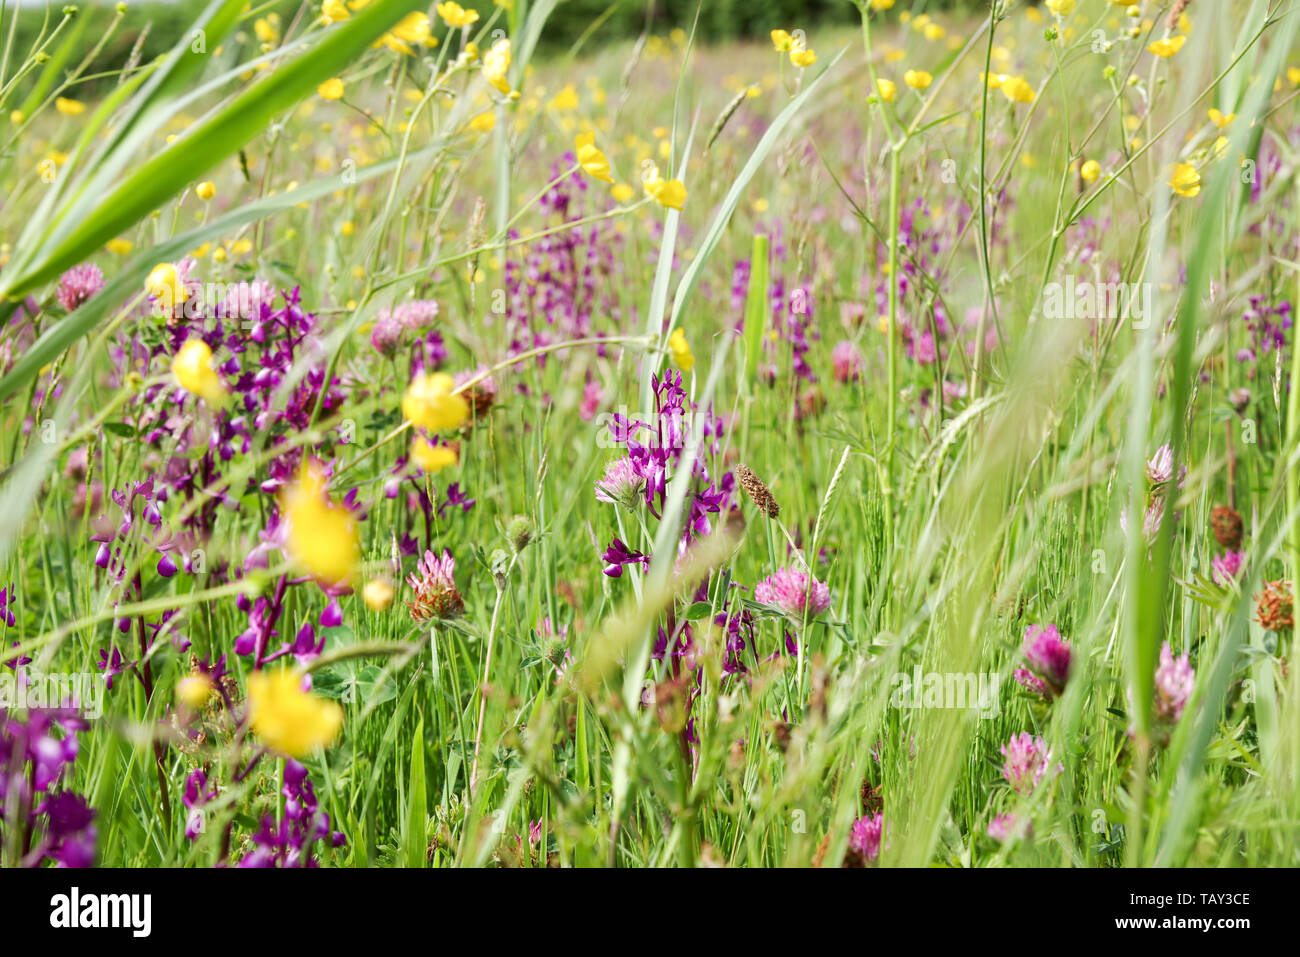 Striking Anacamptis laxiflora (loose-flowered orchid) flowering in Les Vicheries orchid fields in Guernsey, Channel Islands Stock Photo